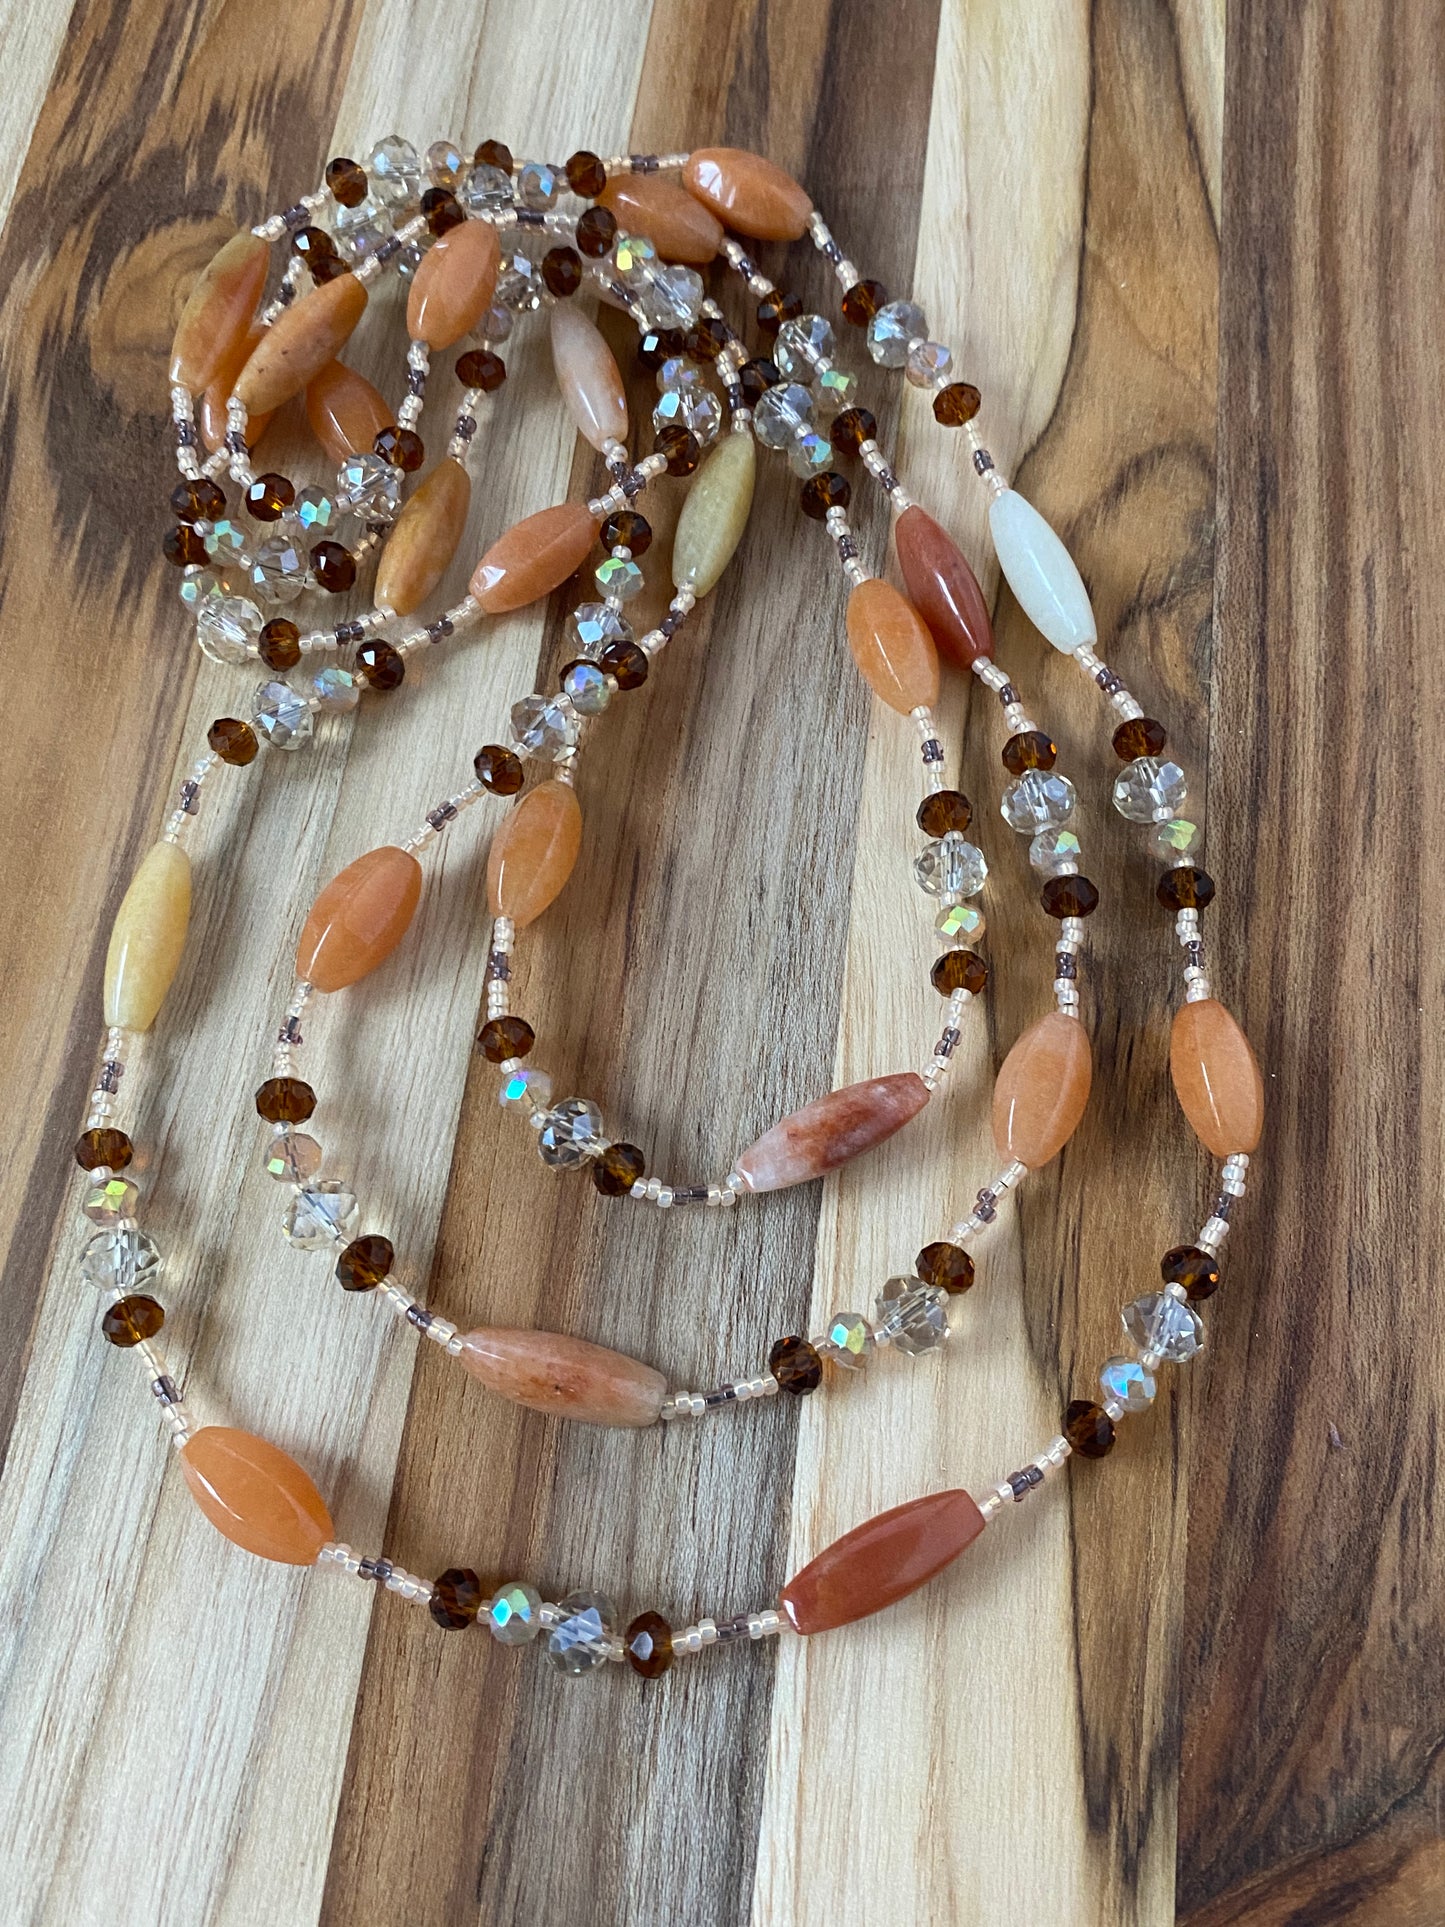 60" Extra Long Agate Beaded Necklace with Brown & Champagne Crystal Beads My Urban gems